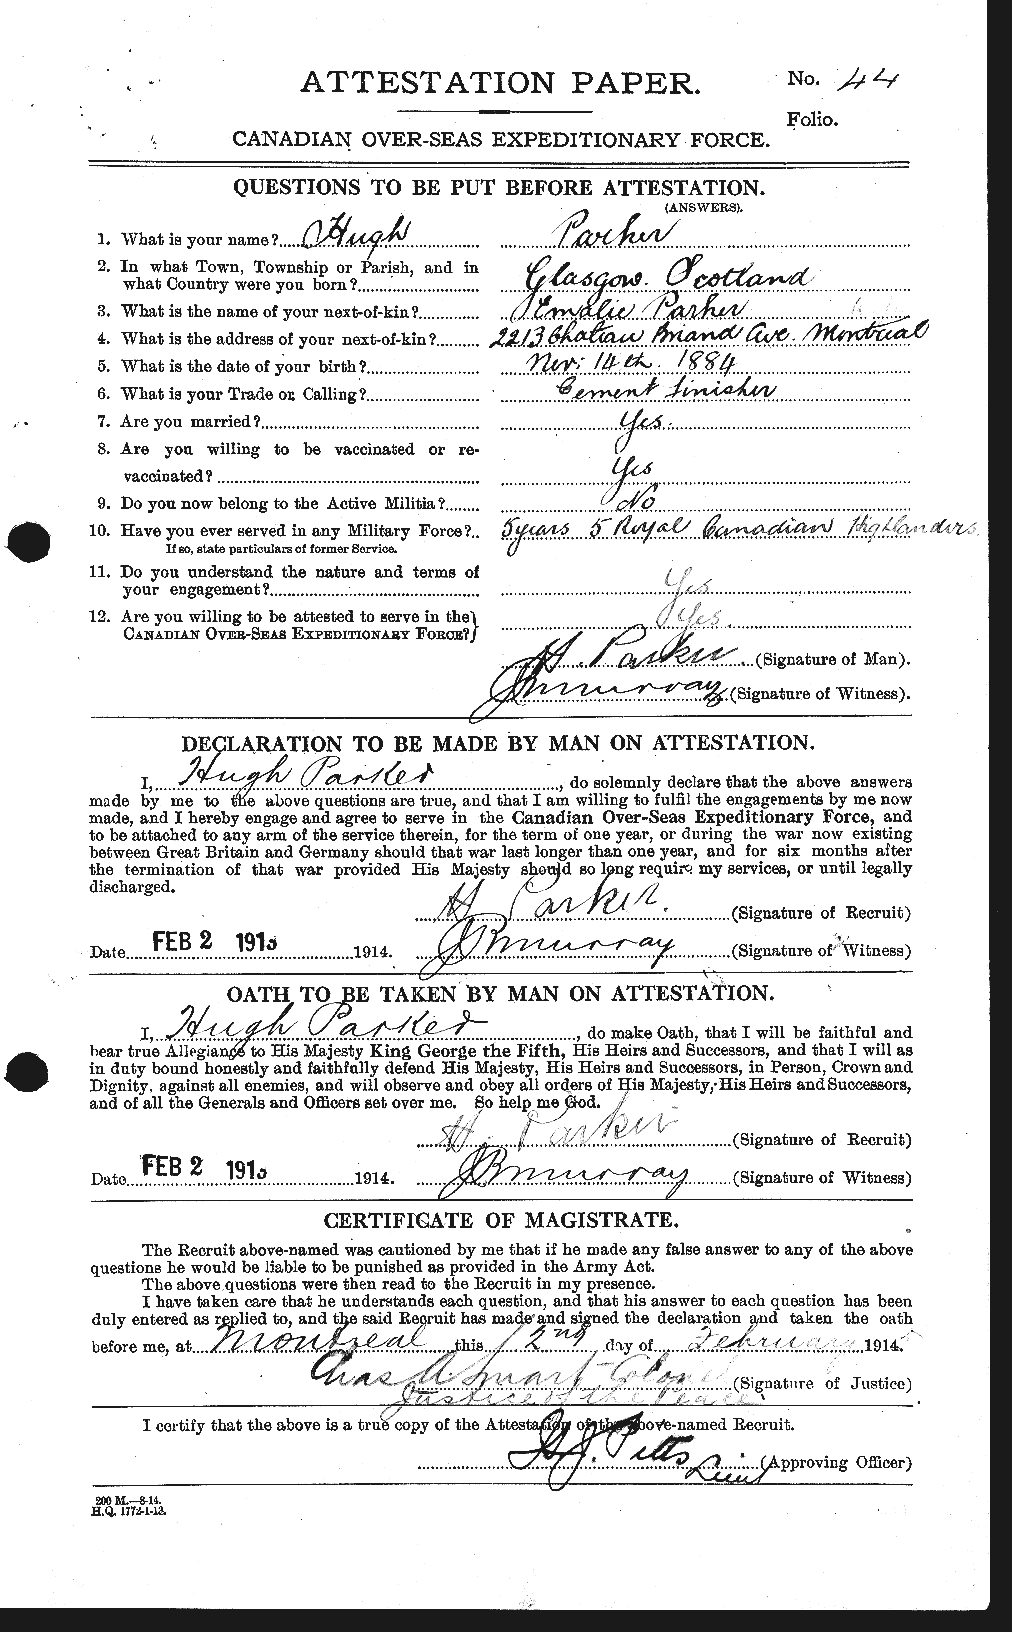 Personnel Records of the First World War - CEF 565393a